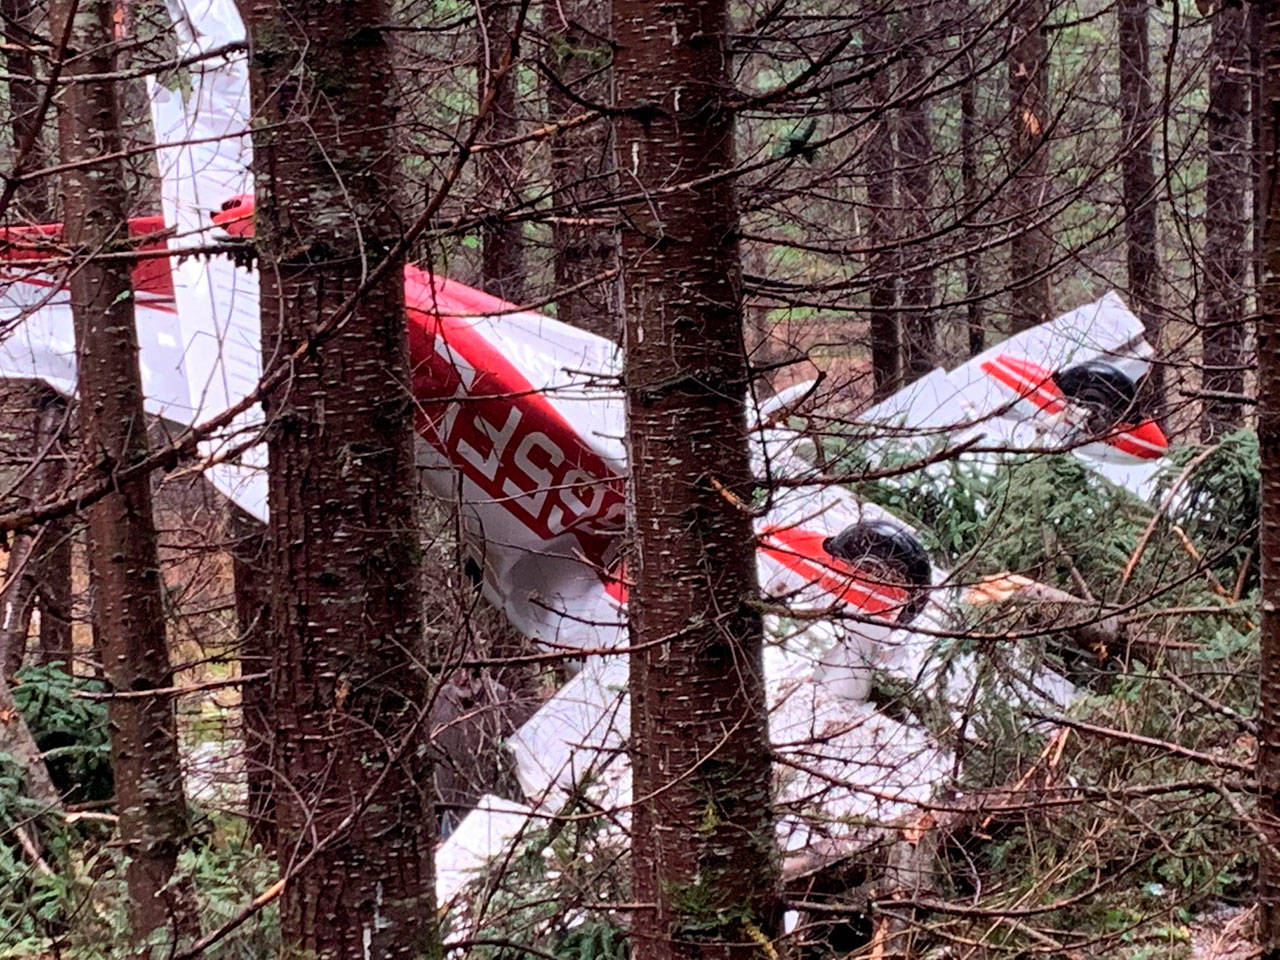 By flying through treetops, pilot Truman O’Brien slowed the small plane so that it finally impacted upside down on soft, wet ground (Craig Beles Photo).